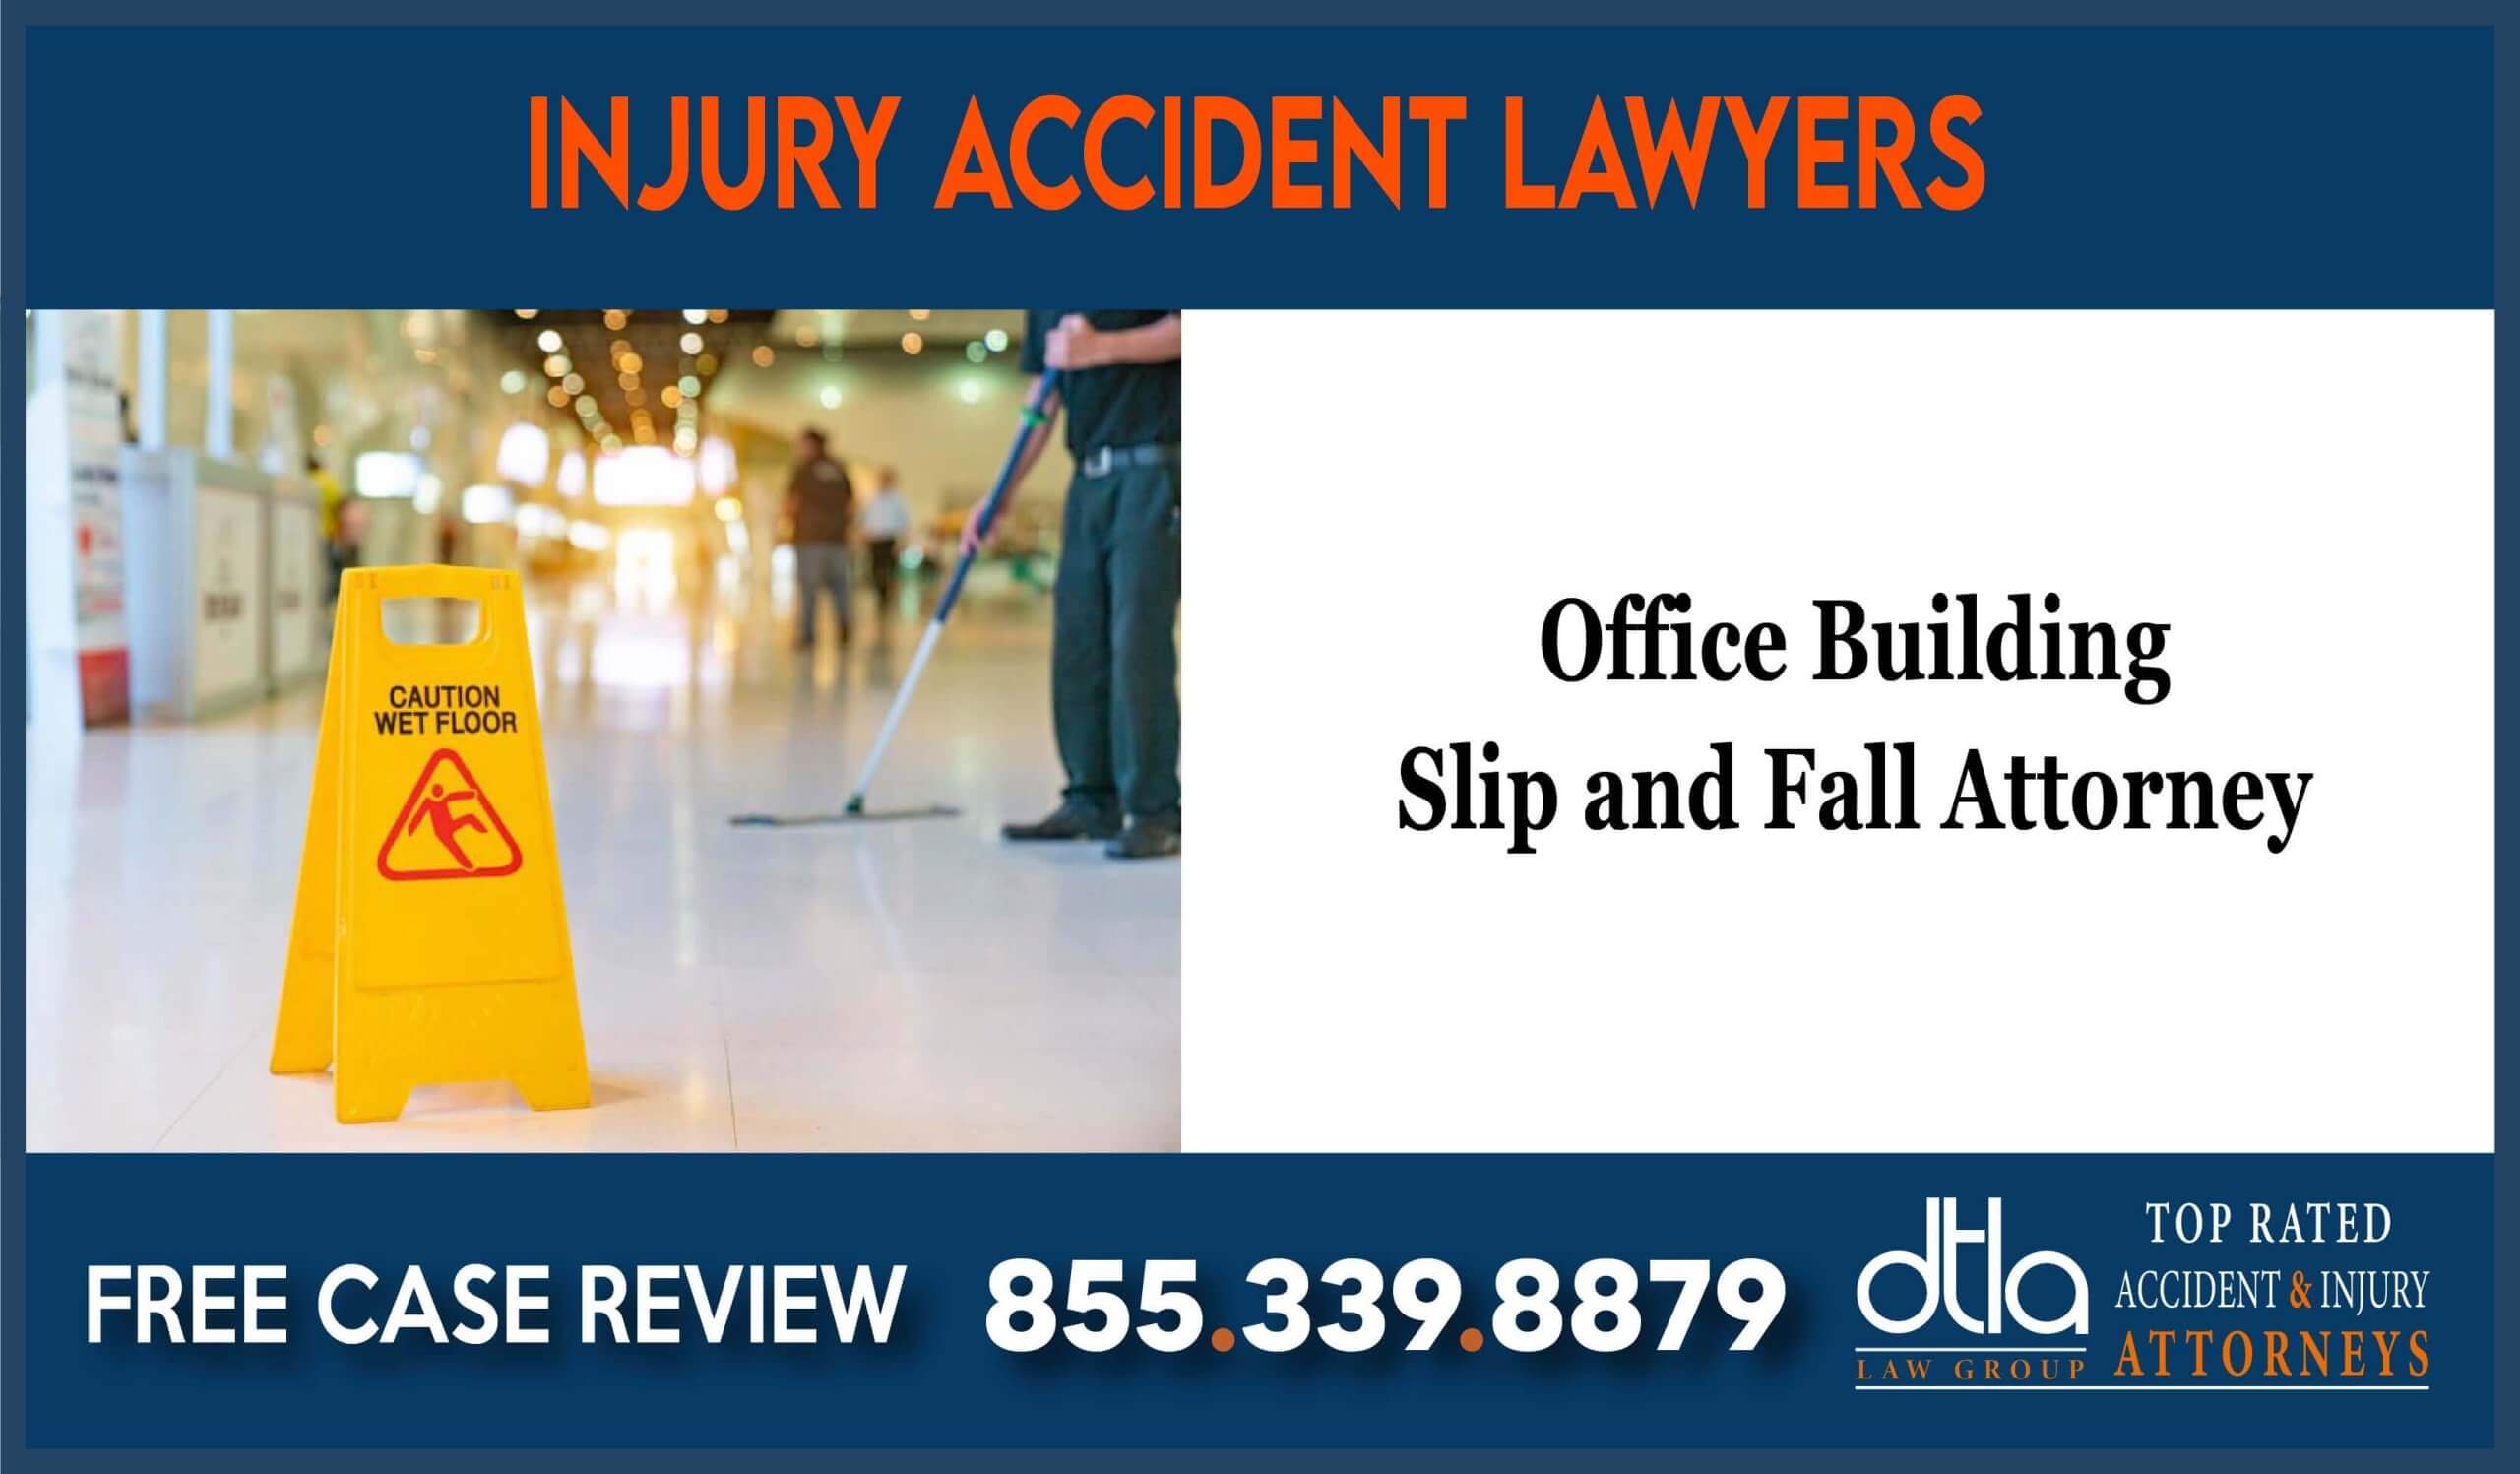 Office Building Slip and Fall Attorney sue lawsuit compensation incident lawyer